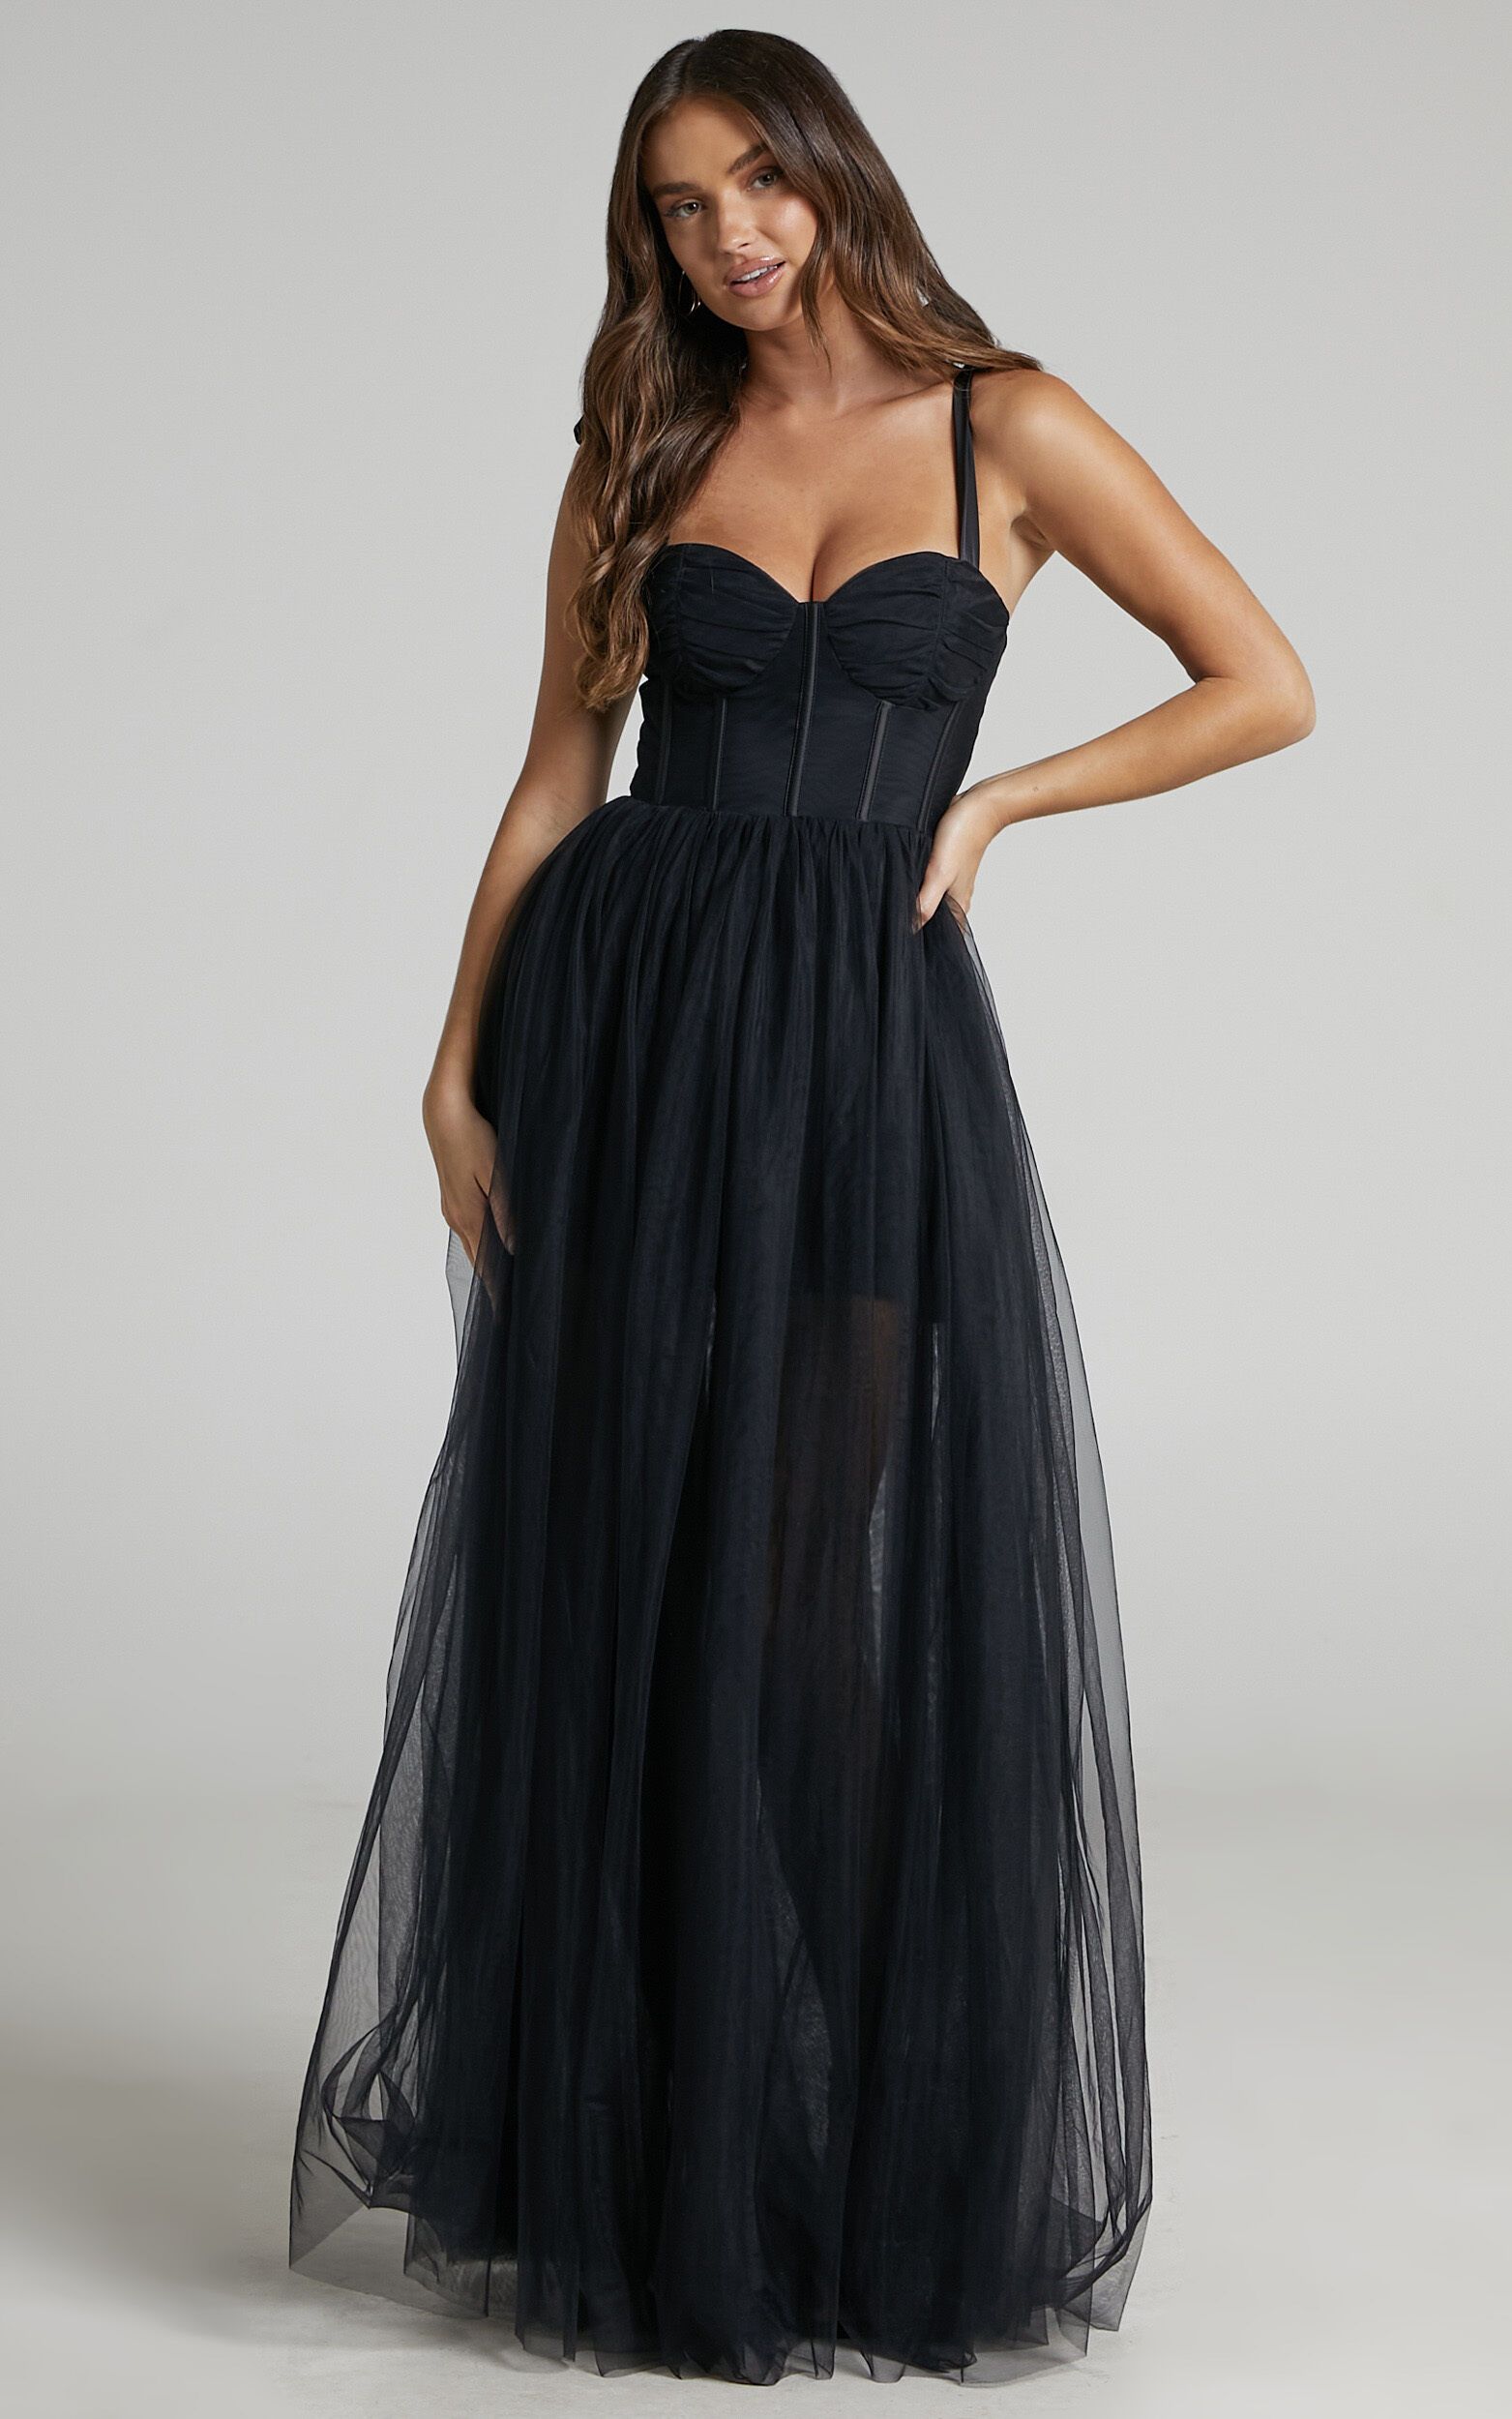 Emmary Bustier Bodice Tulle Gown in Black | Showpo (US, UK & Europe)